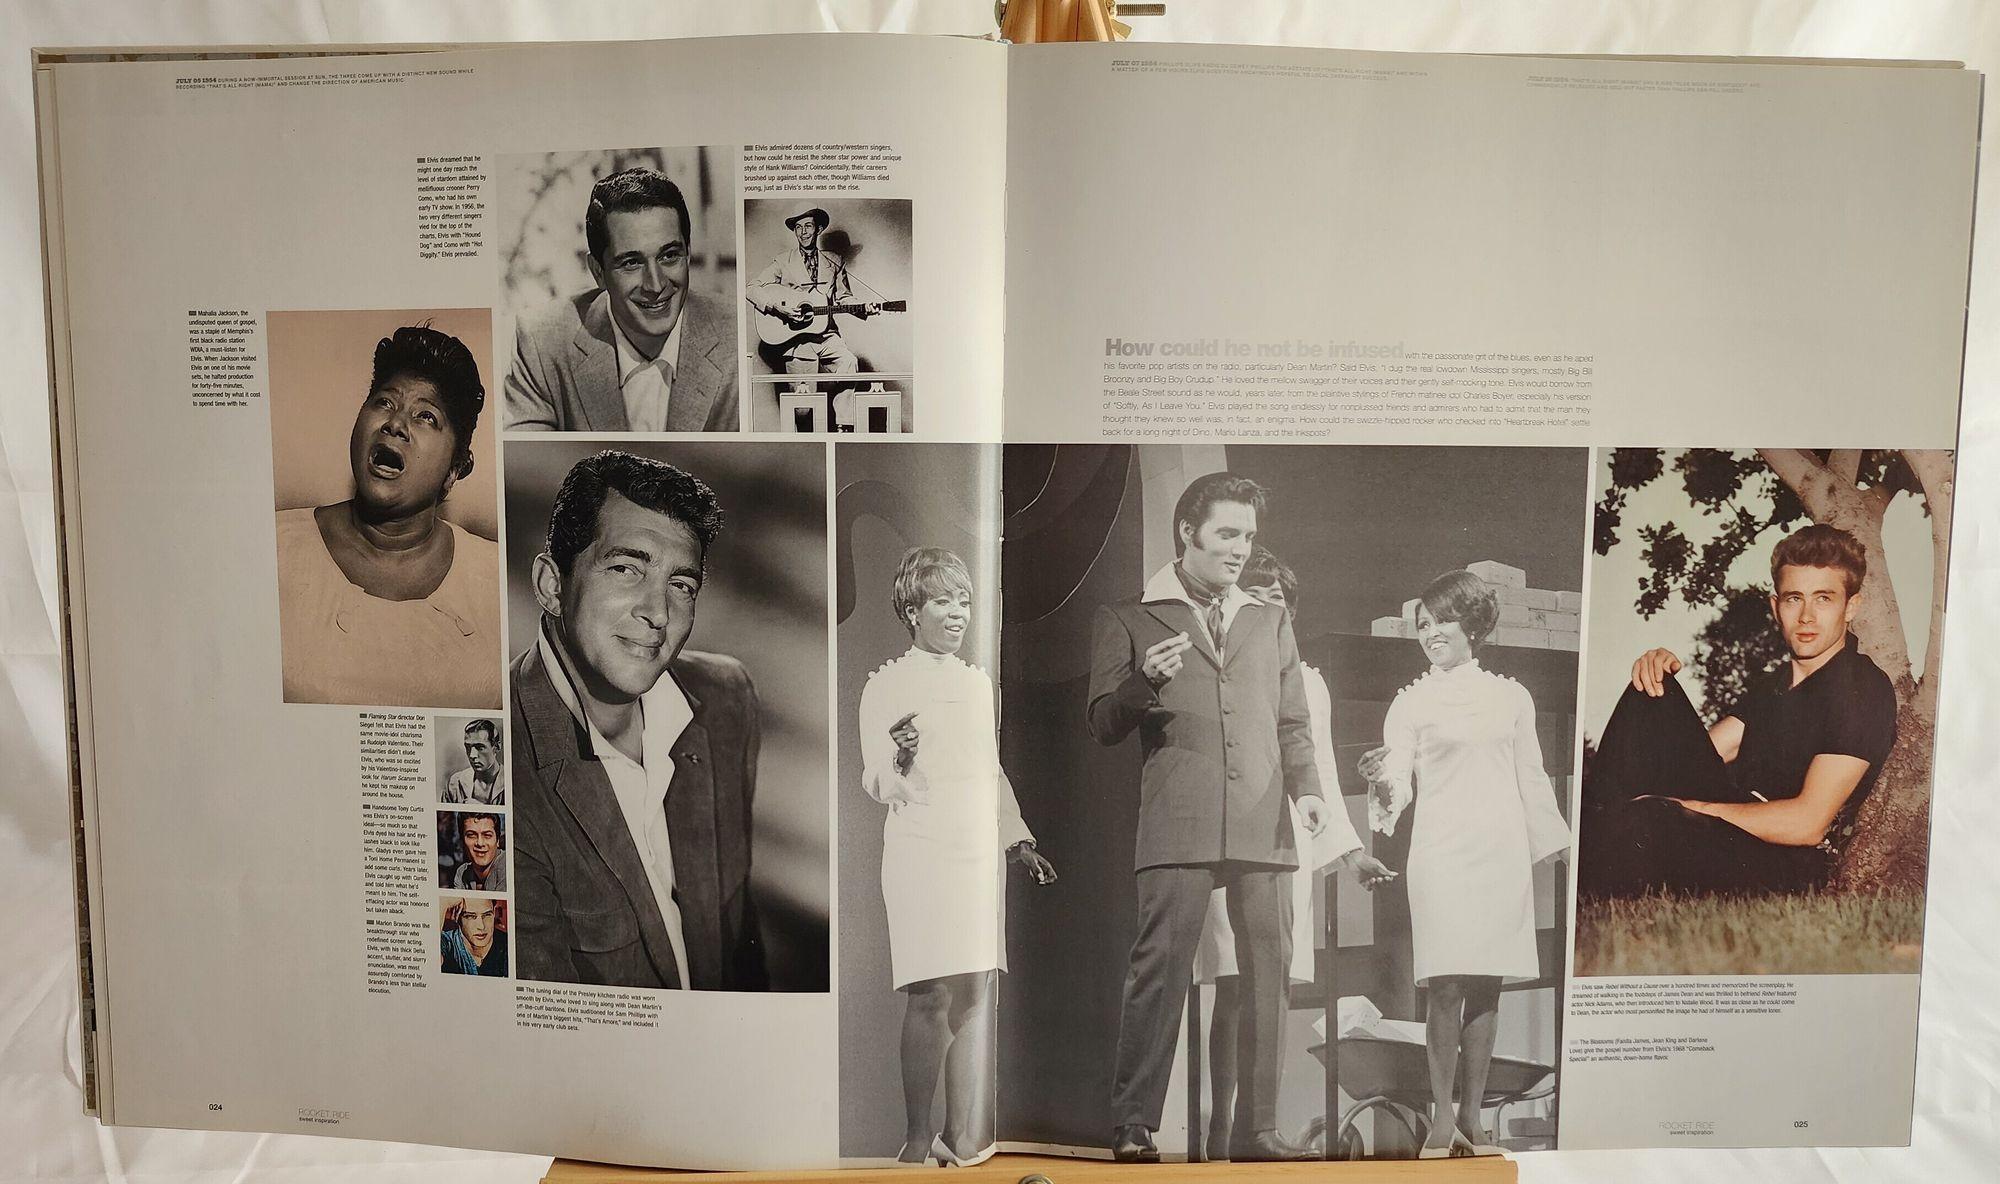 American The King by Jim Piazza Elvis Presley - Large size coffee table book For Sale